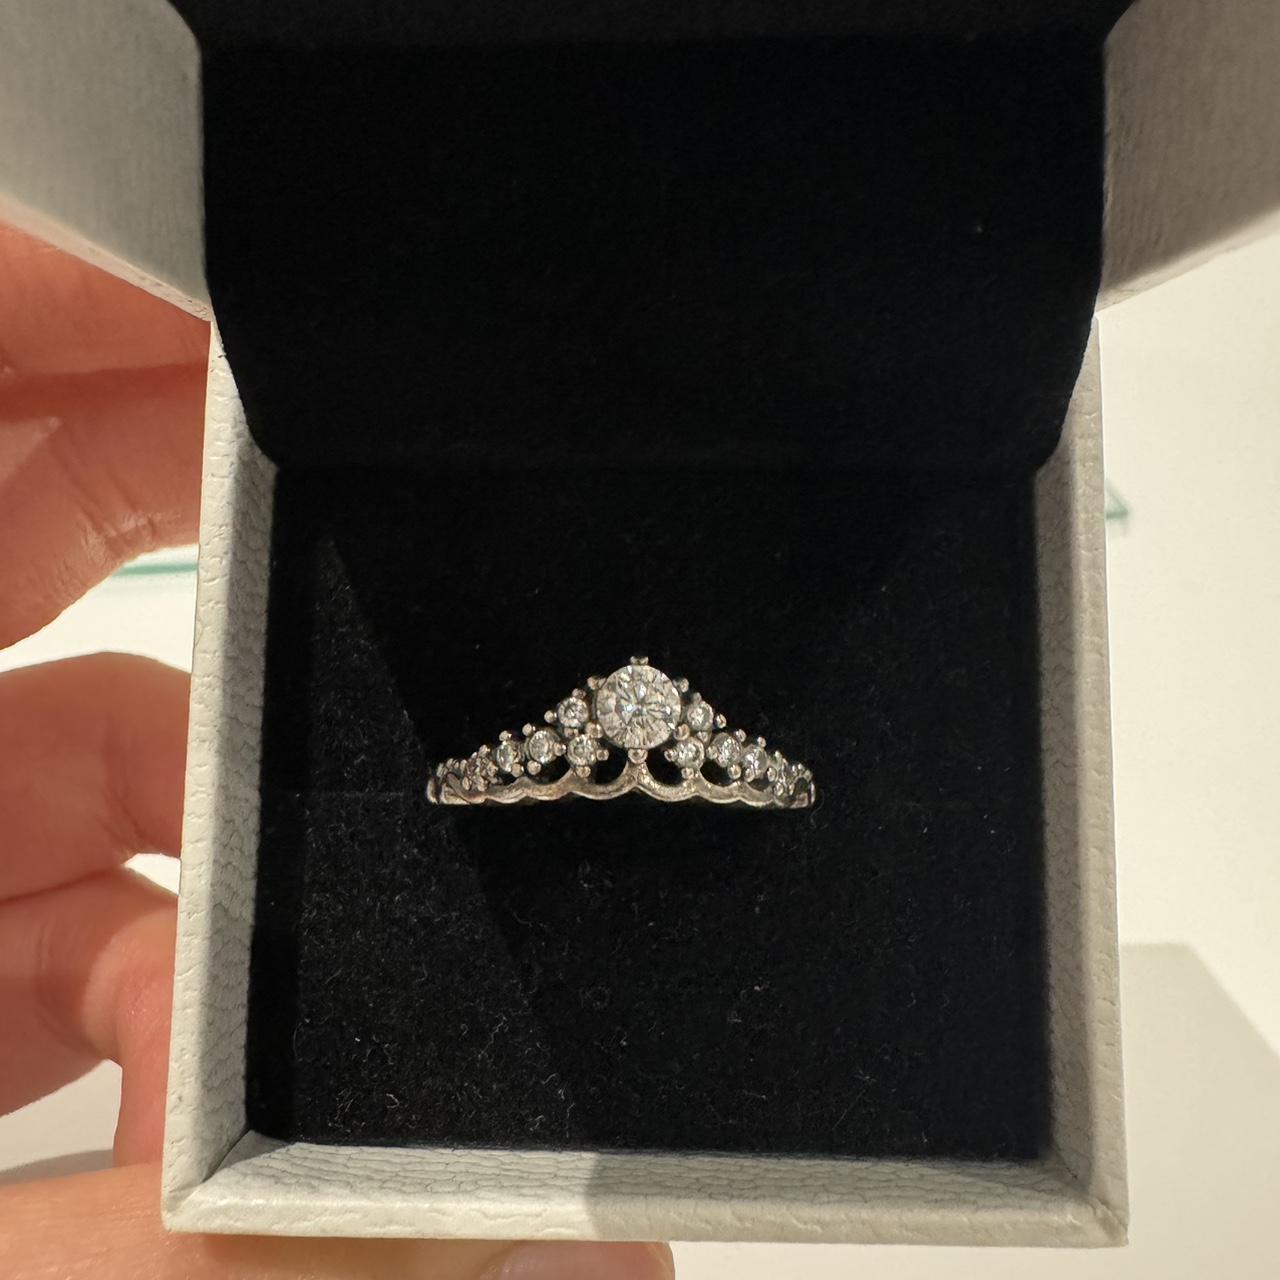 Jewlr - True love's kiss and a Princess Ring are the perfect recipe for  your fairy tale 💖 Fairytale Princess Tiara Ring https://jwl.io/7a570 |  Facebook